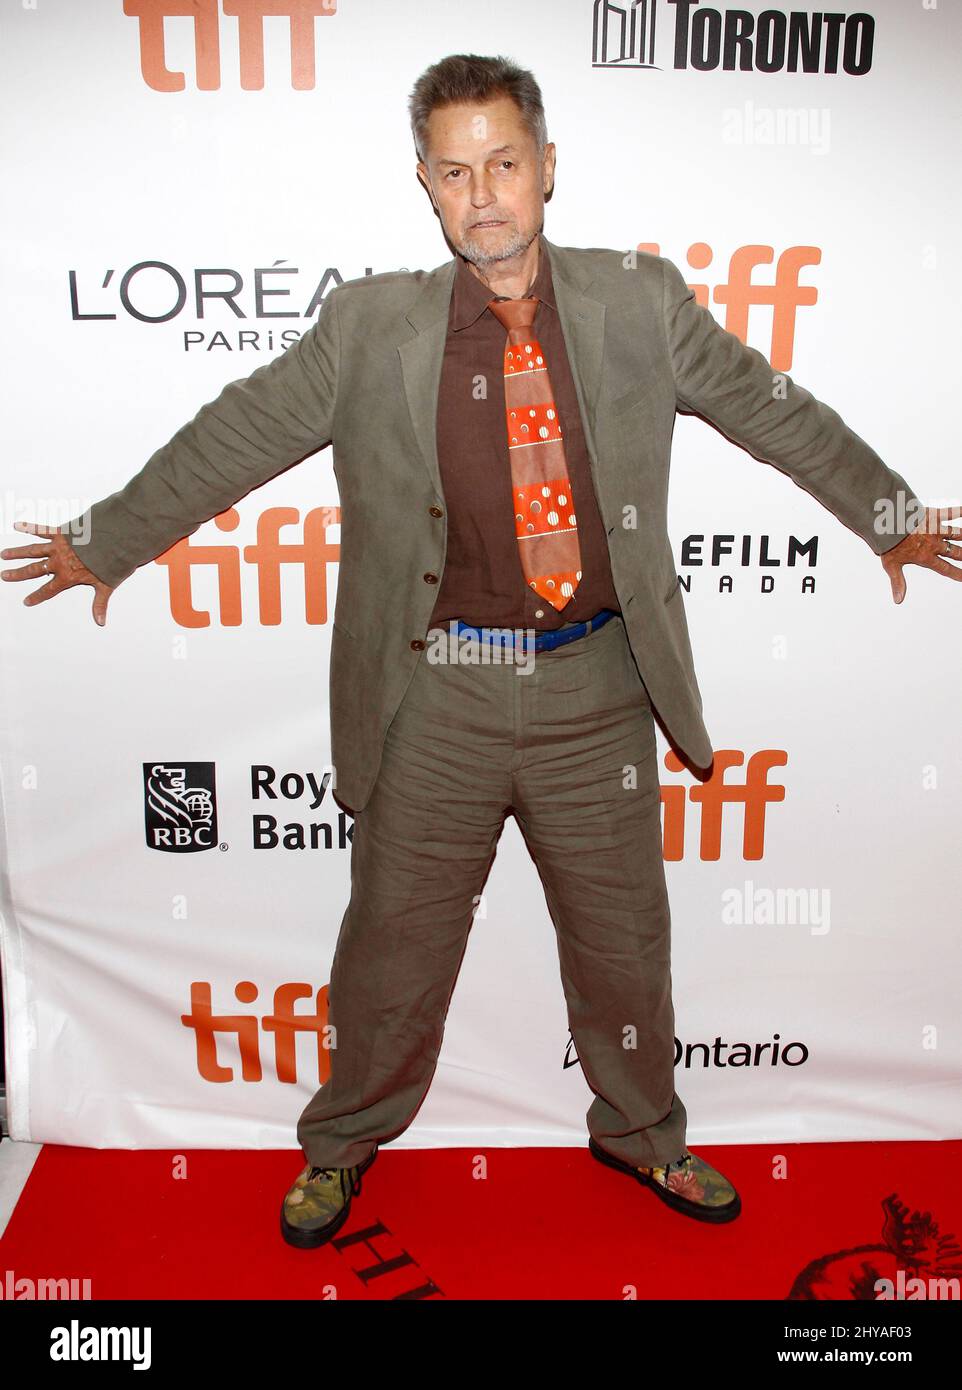 Jonathan Demme arriving for the Justin Timberlake + The Tennessee Kids Premiere during the 2016 Toronto International Film Festival held at TIFF Bell Lightbox, Toronto, Ontario, Canada, September 13, 2016. Stock Photo